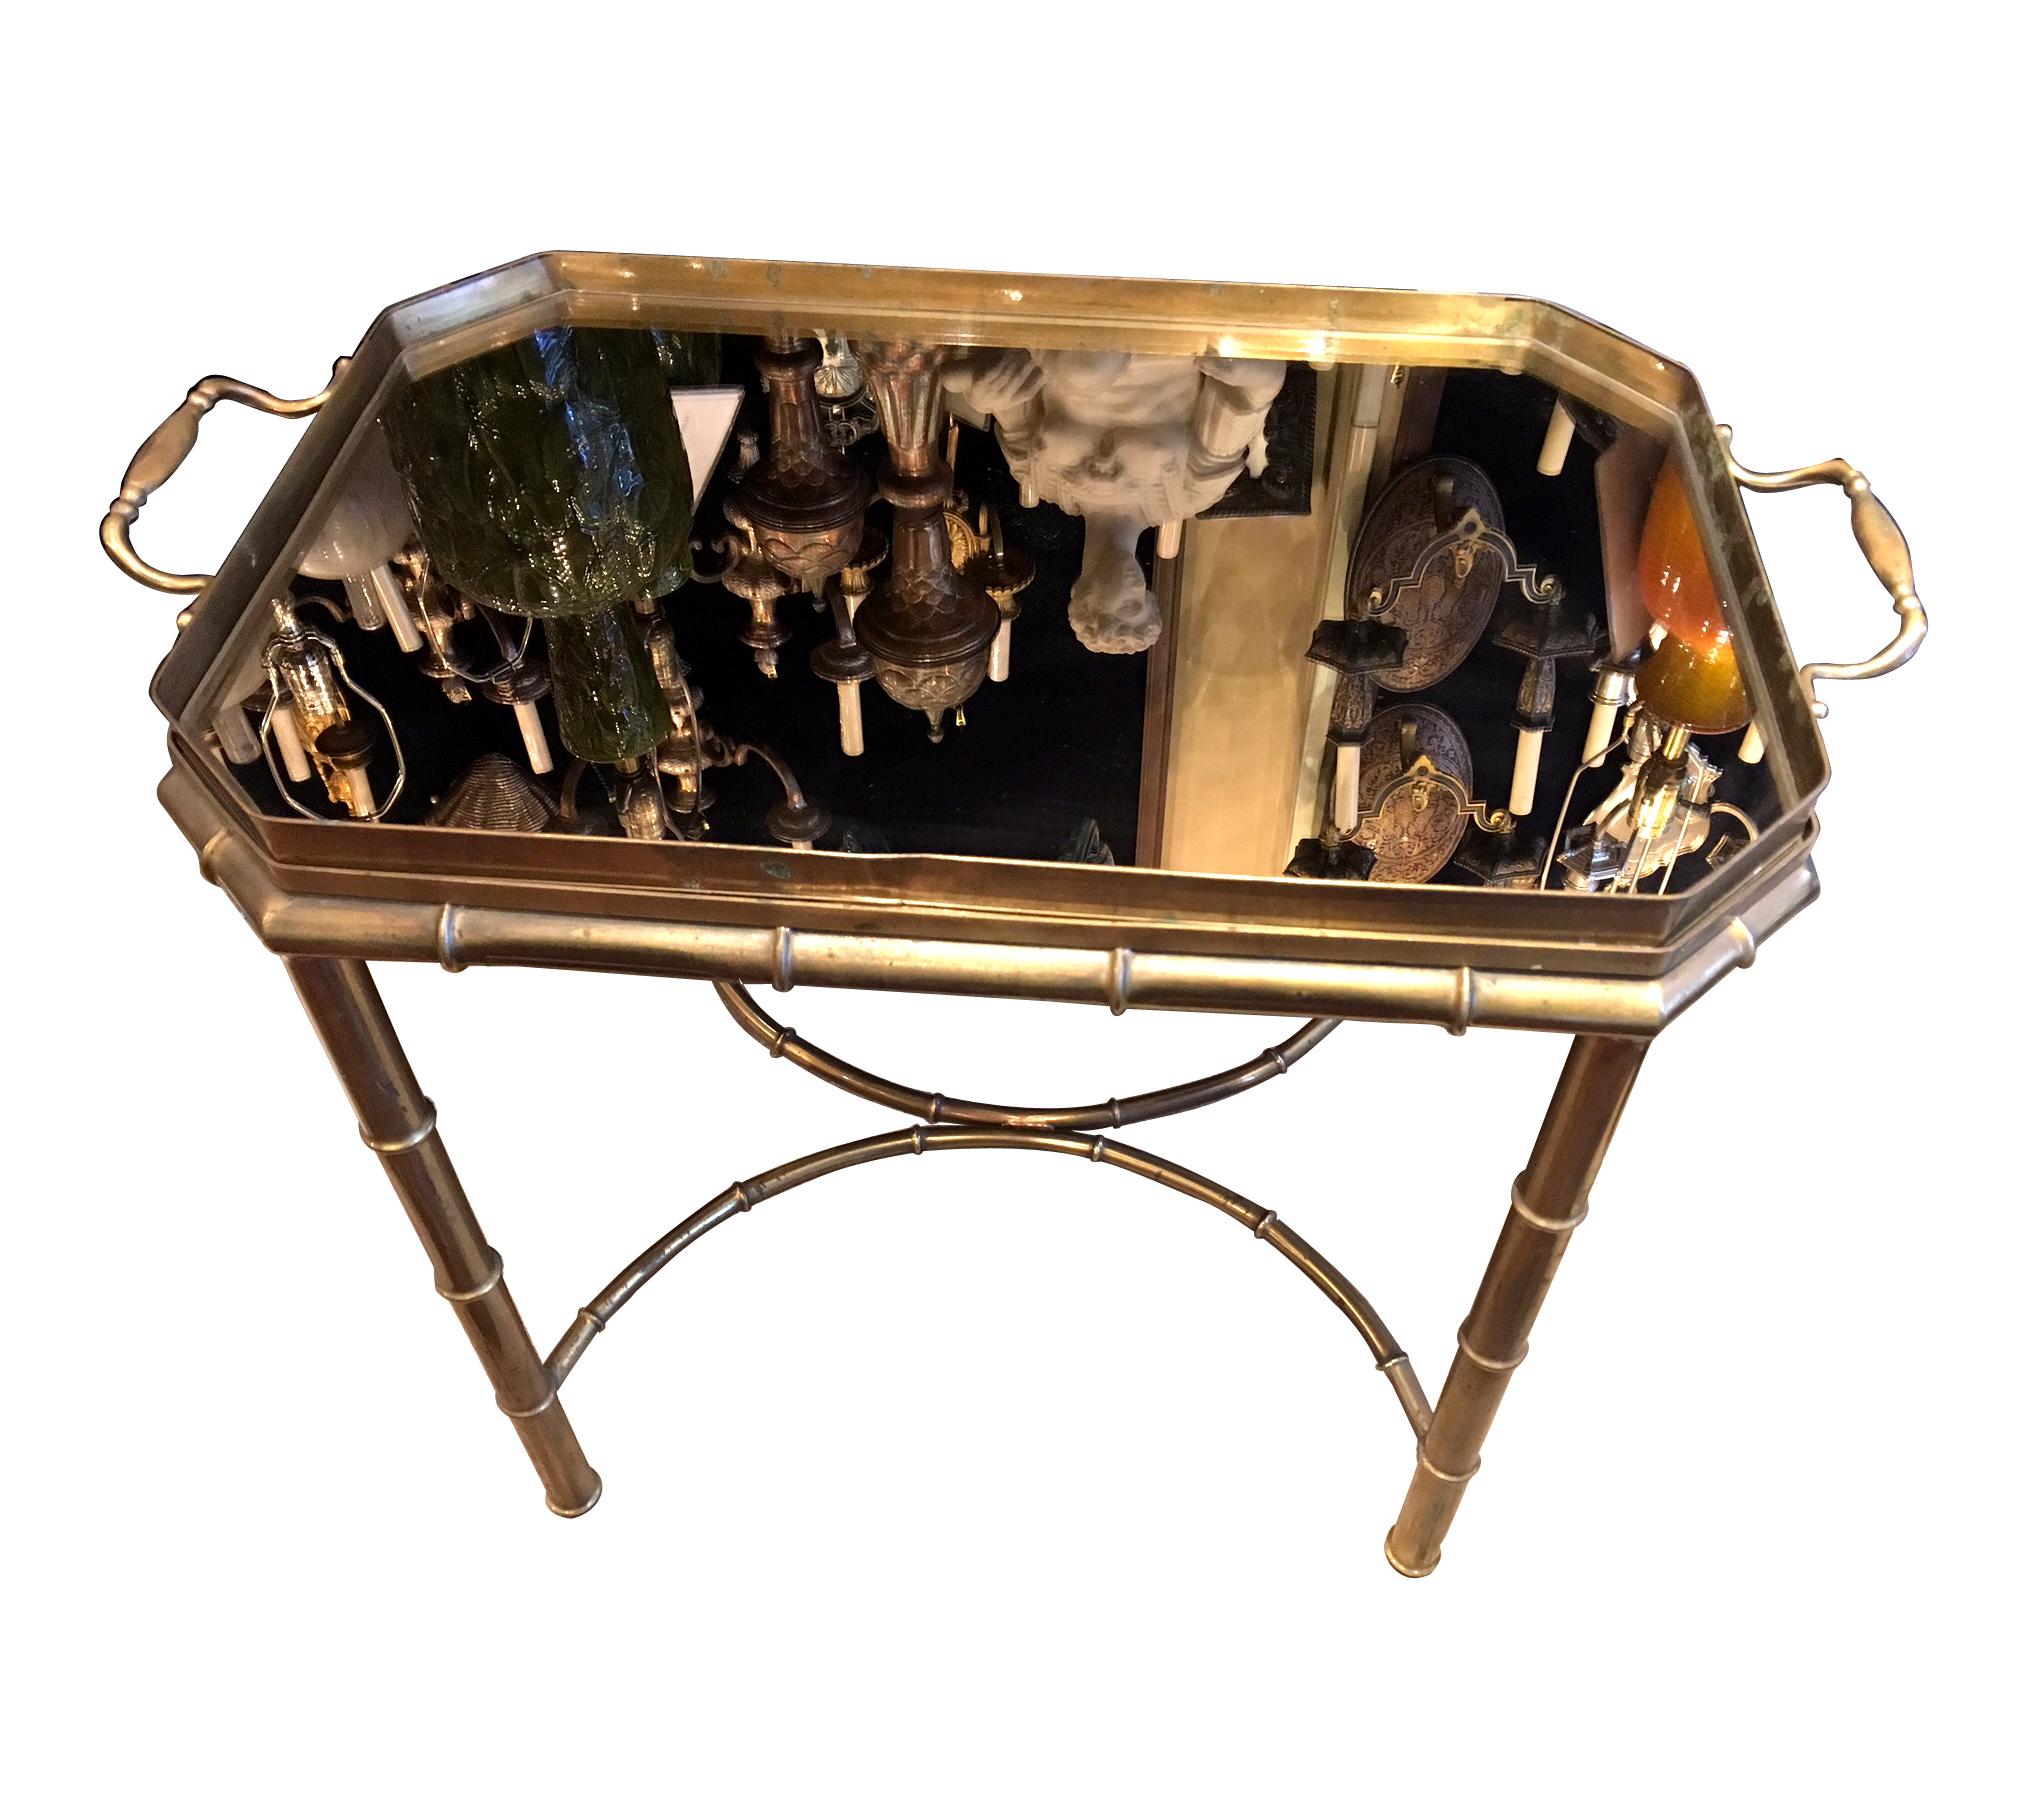 A French mirror-top bamboo shaped tray coffee table with original patina, circa 1940s. Tray lifts off for service.

Measurements:
Height: 21